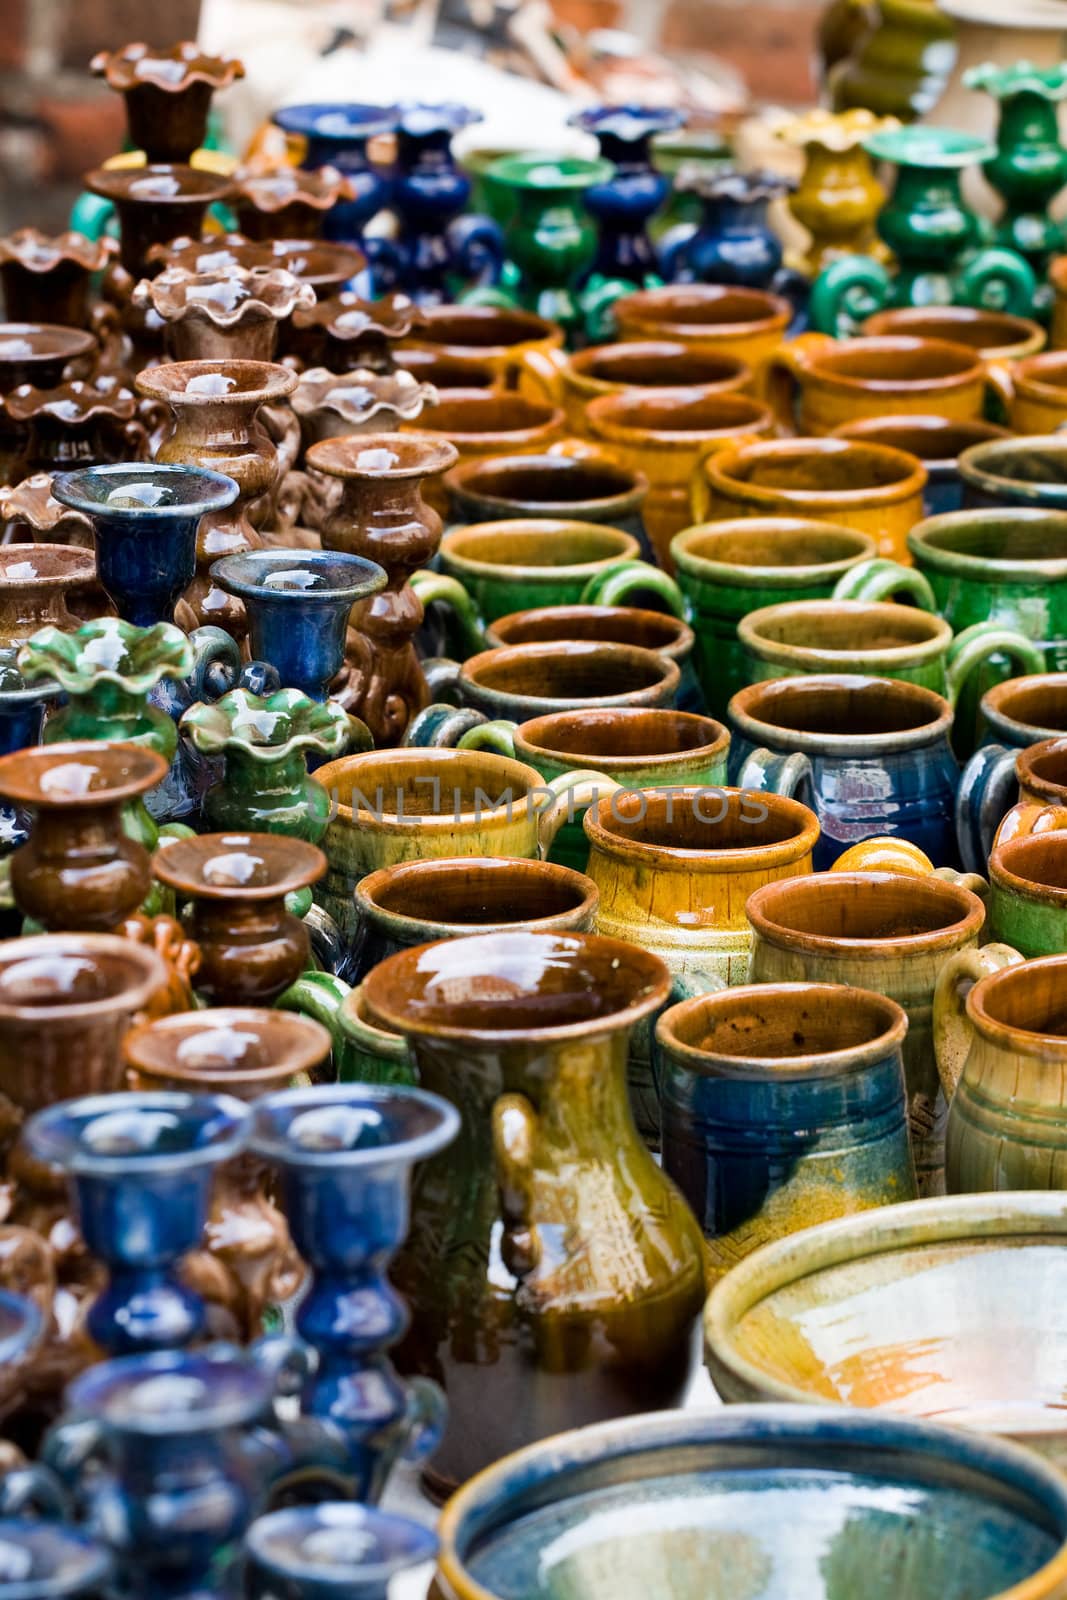 Glazed colourful pottery products ready for sale